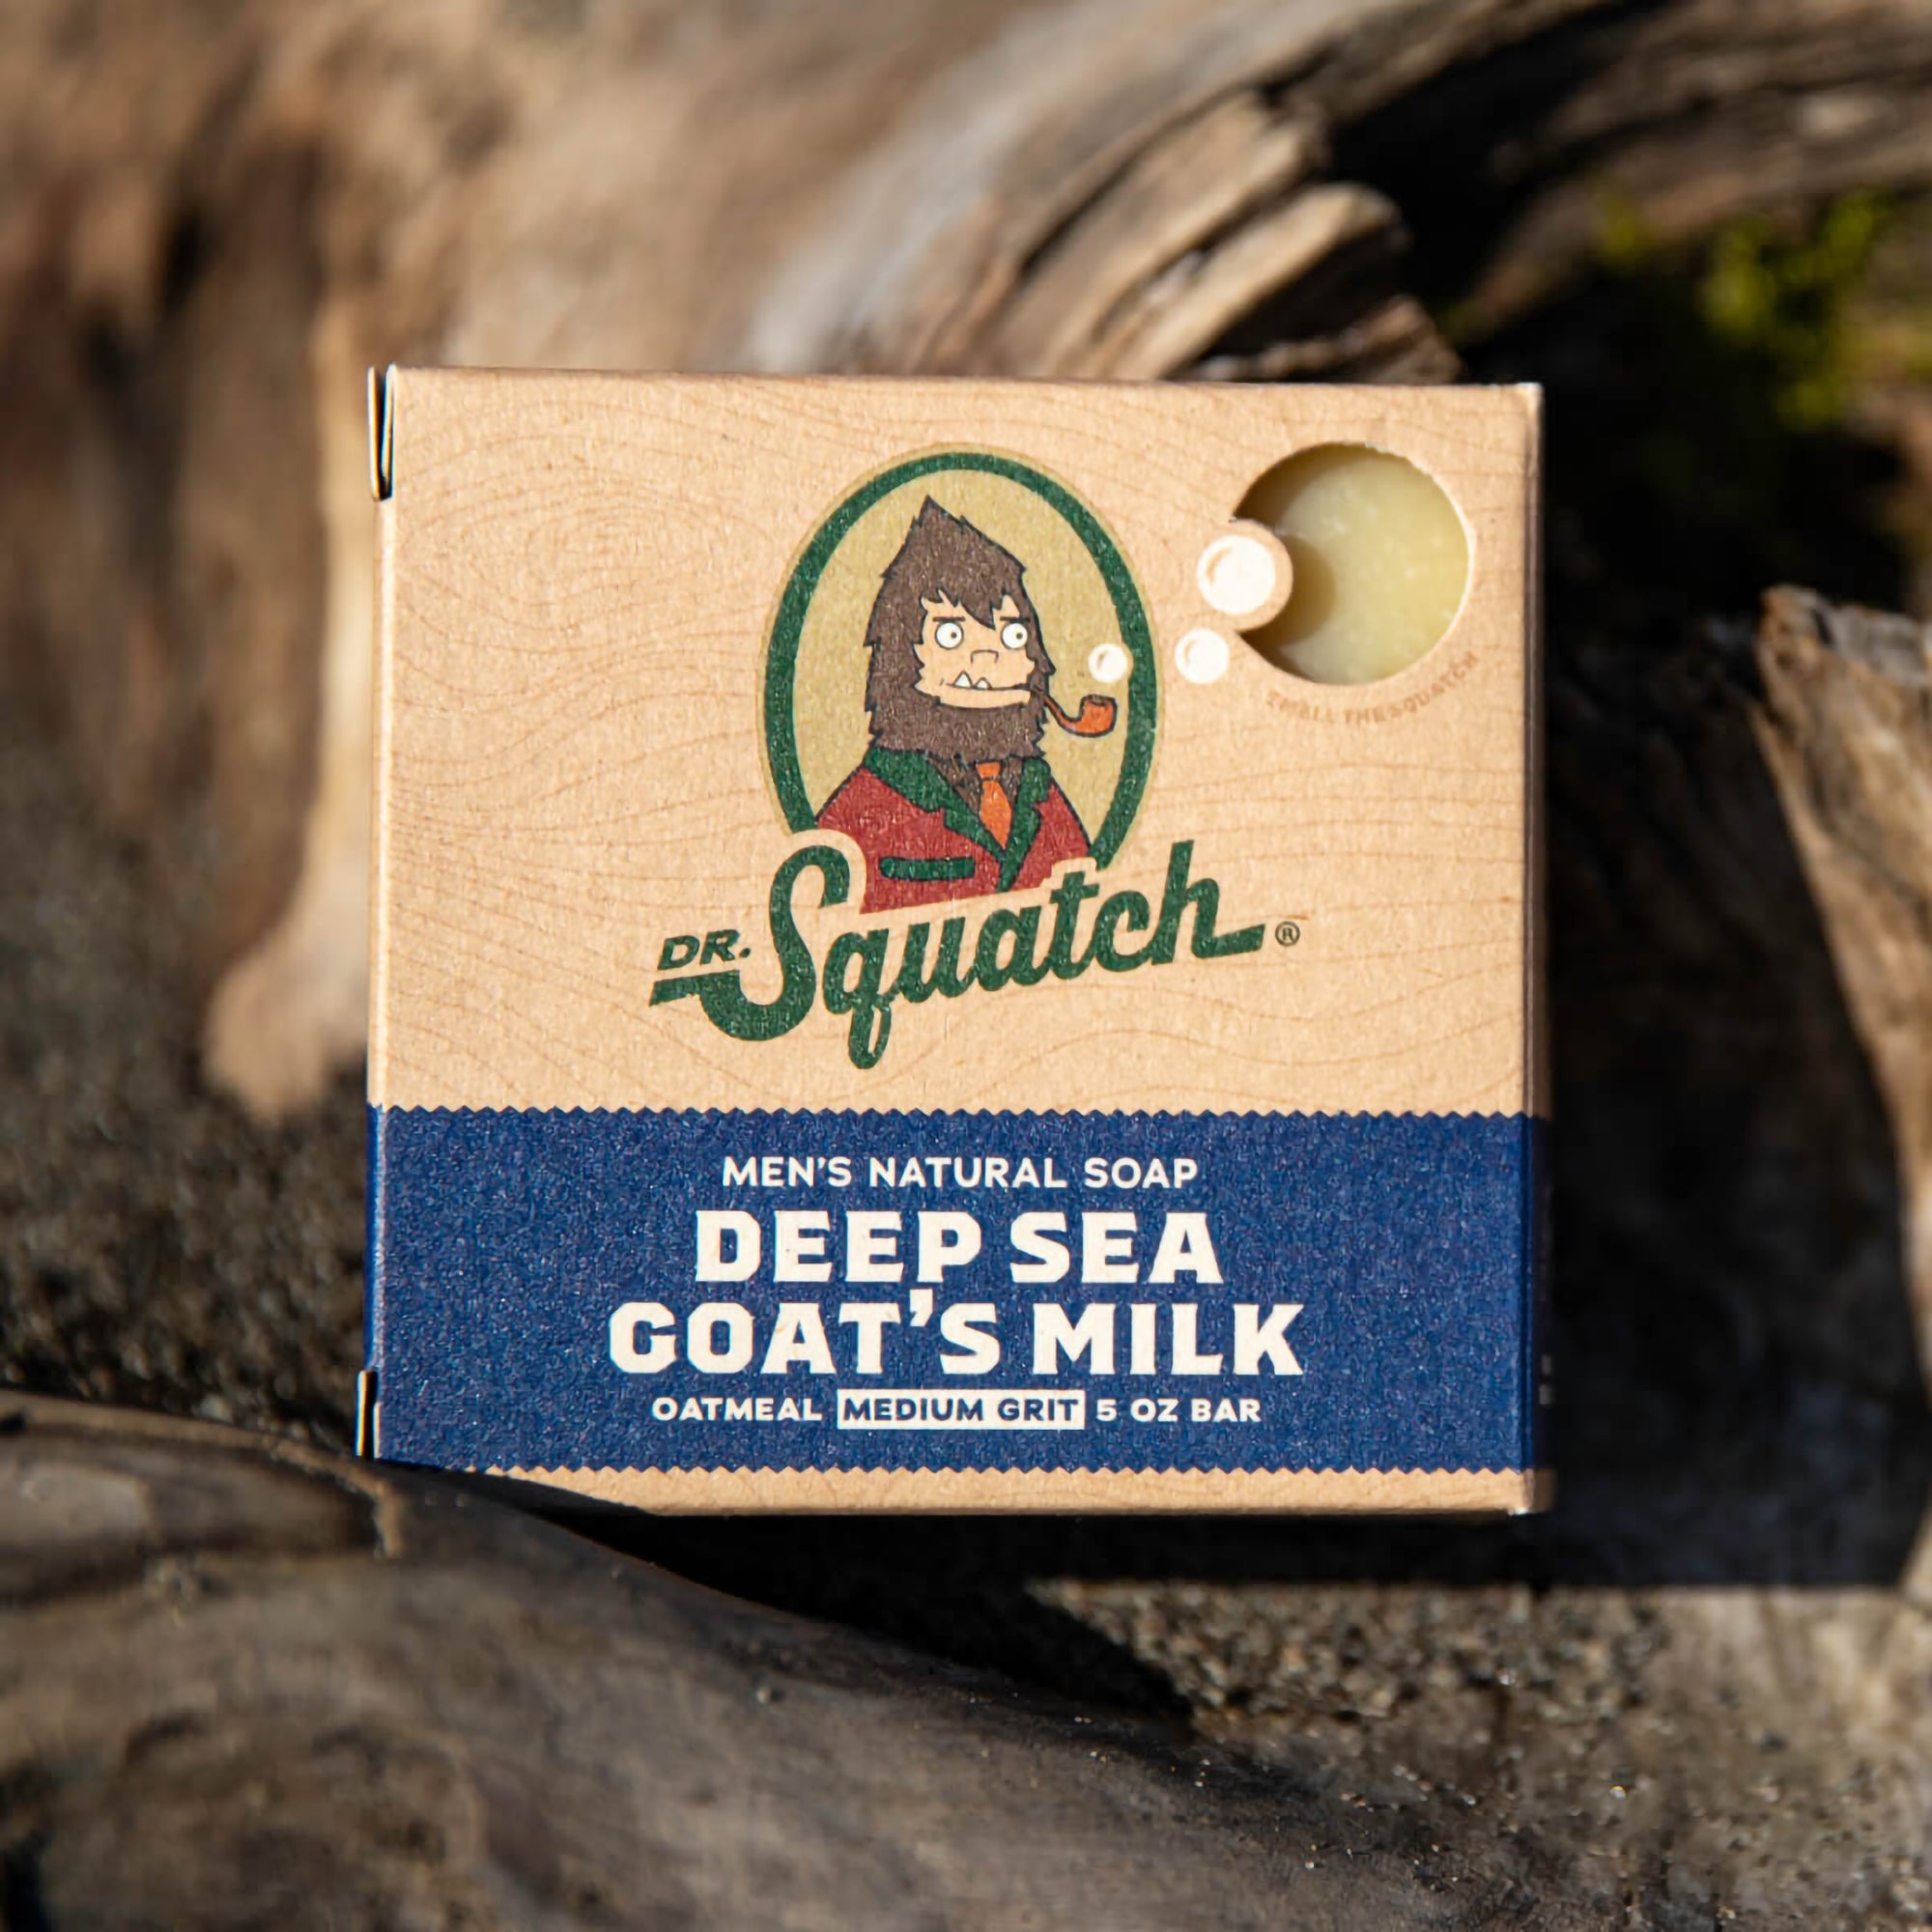 Dr. Squatch Soap - Travel Bag - FREE SHIPPING!!!!